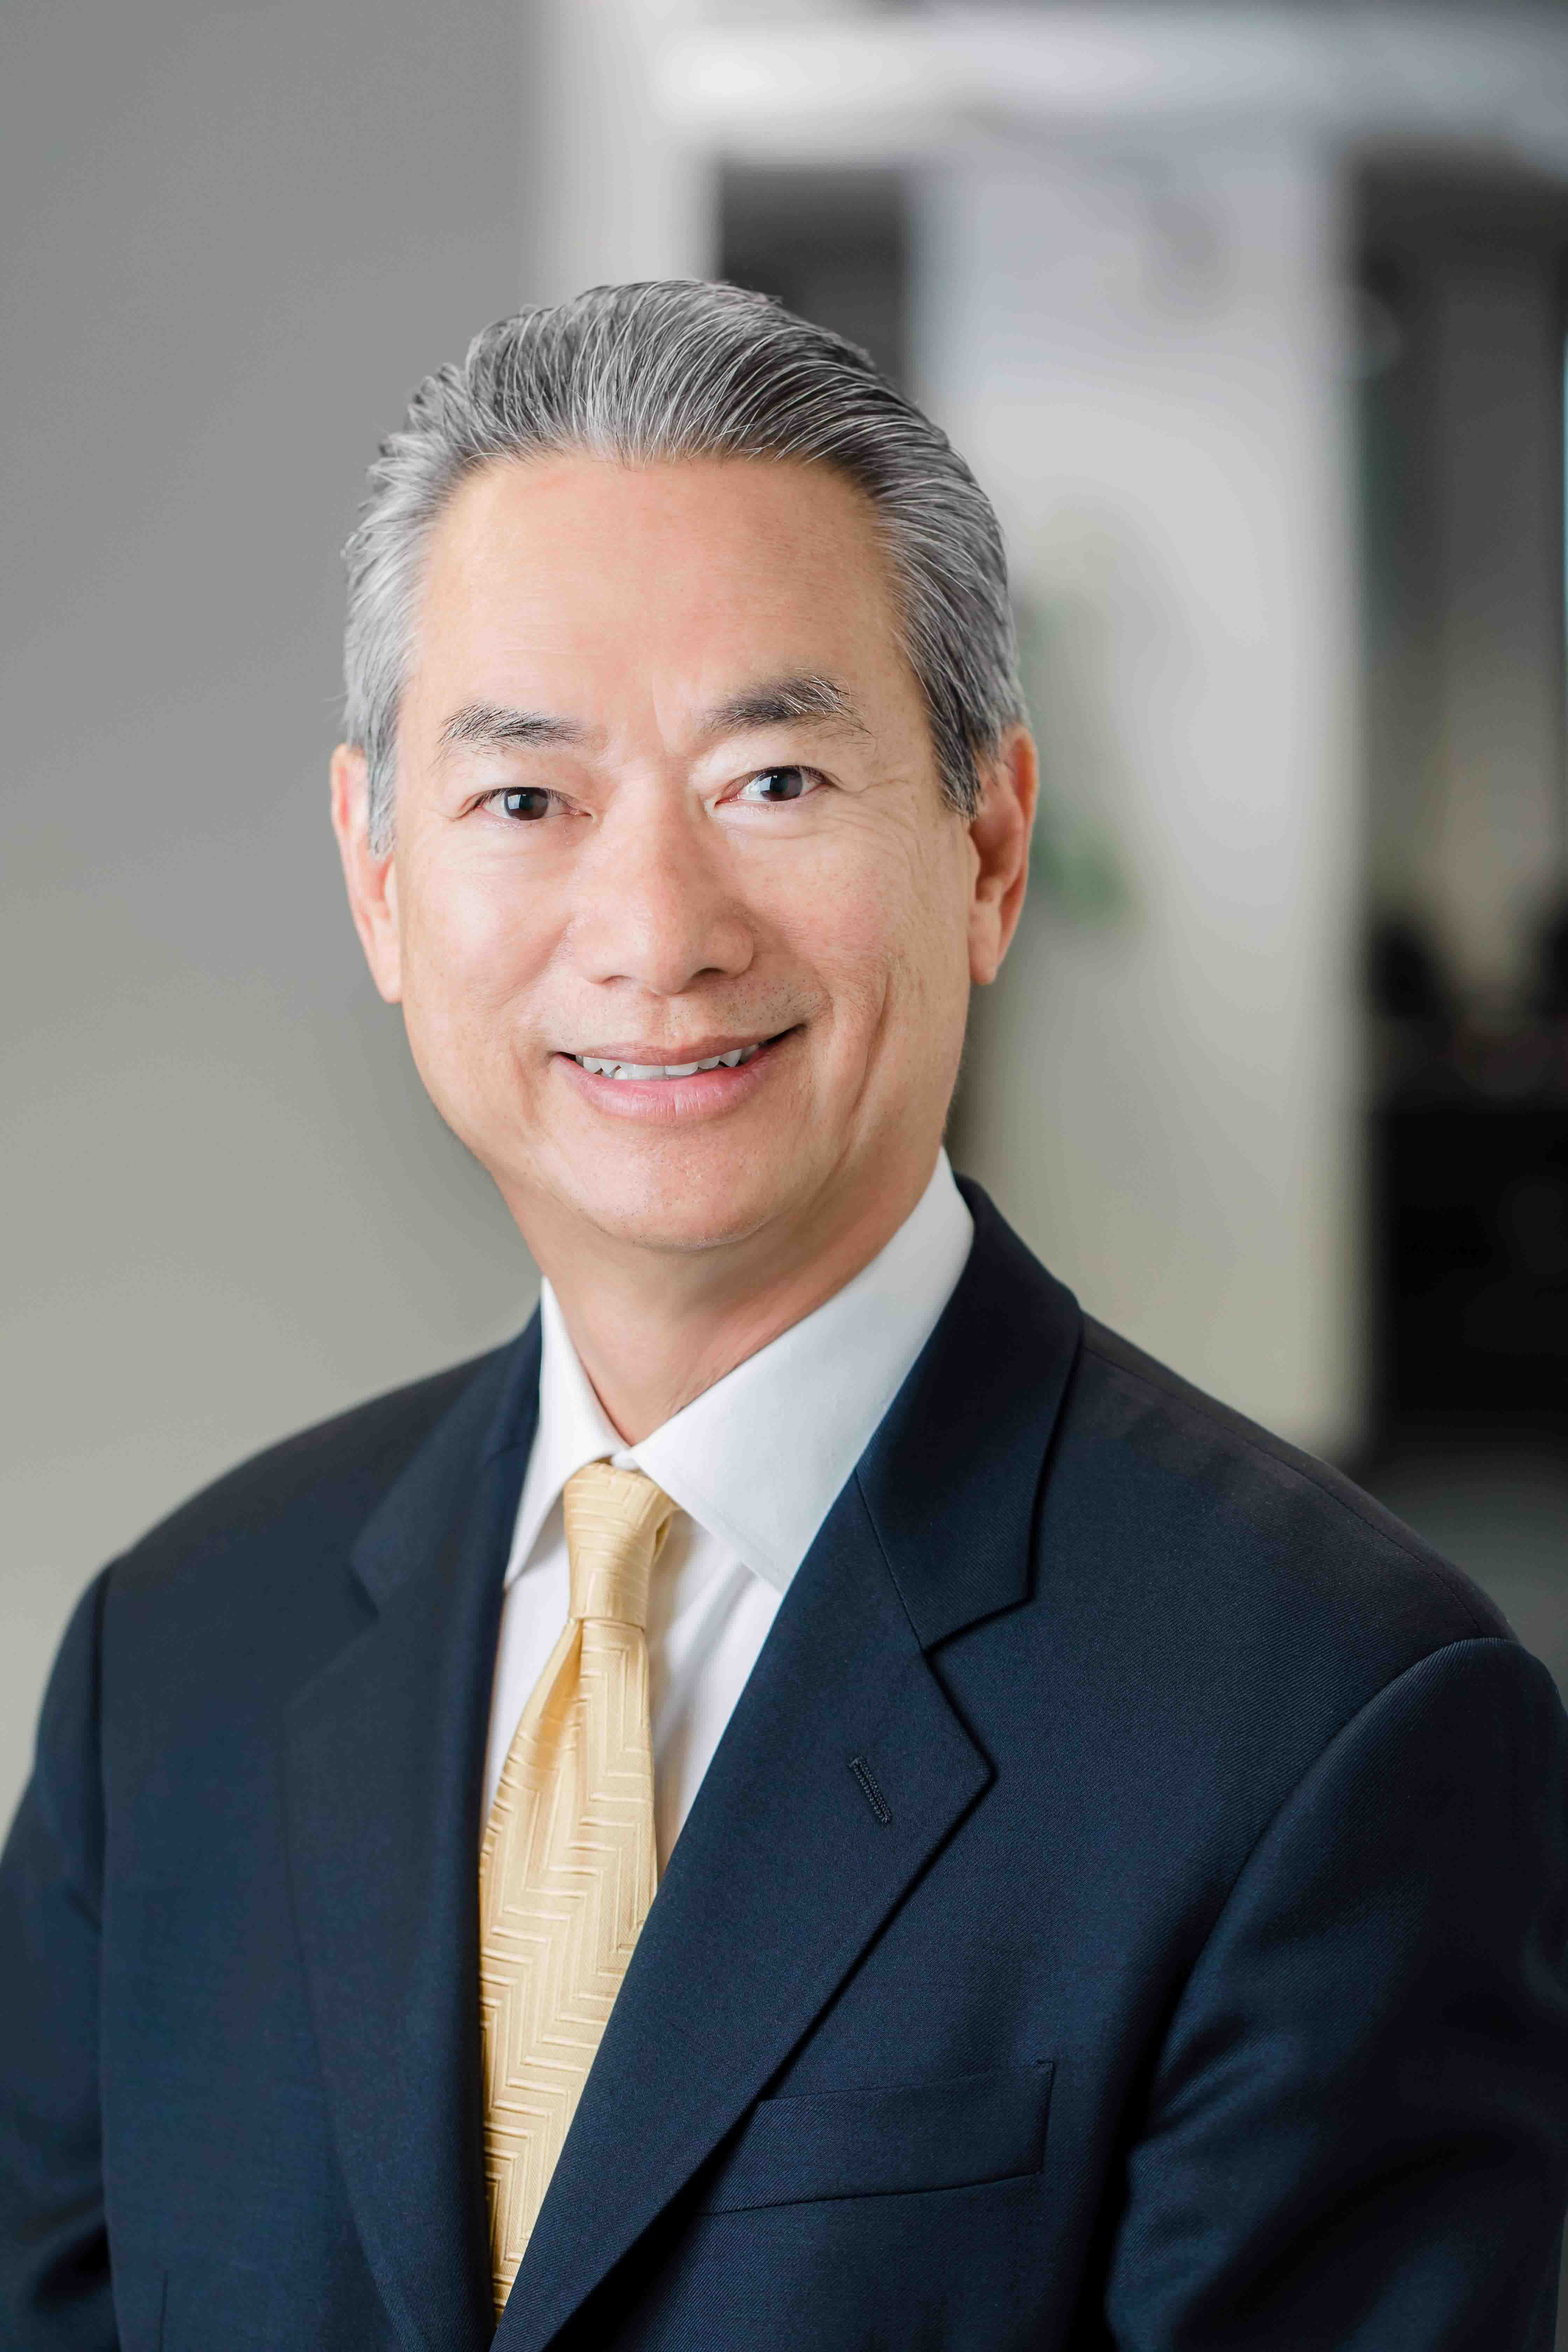 Phillip T. Thong, CPA, MBA
Managing Partner-Phillp T. Thong, CPA, a prof. and Vice Chairman-First Choice Bank